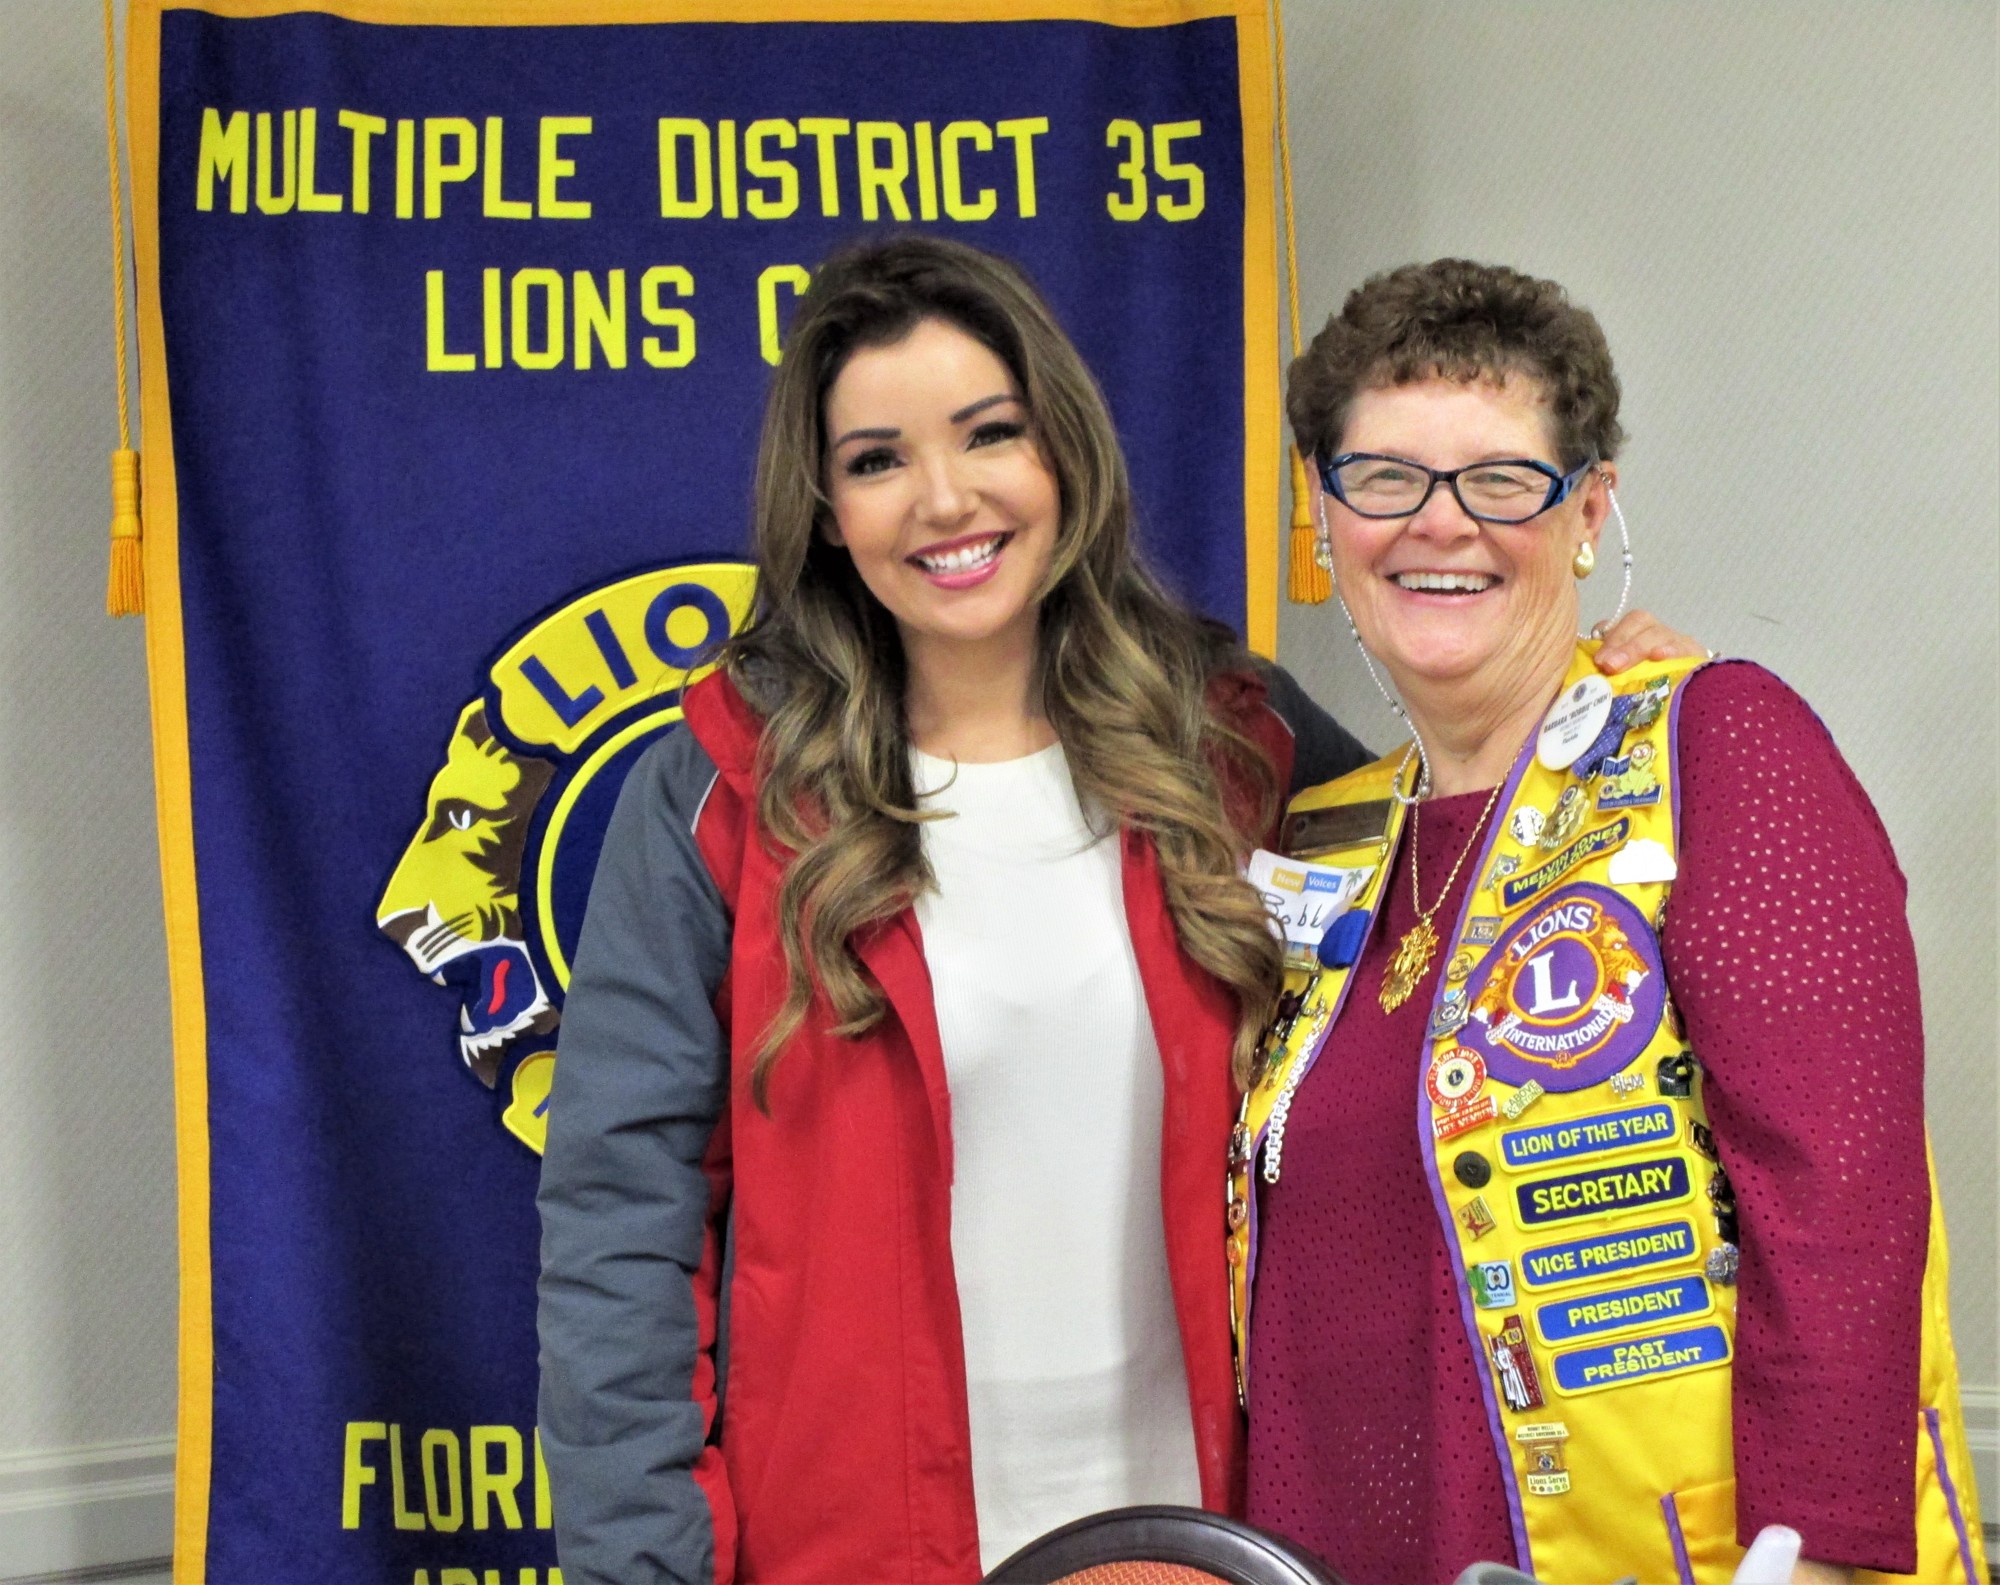 WKMG News Anchor Lisa Bell with Lion Bobbie Cheh. Courtesy photo